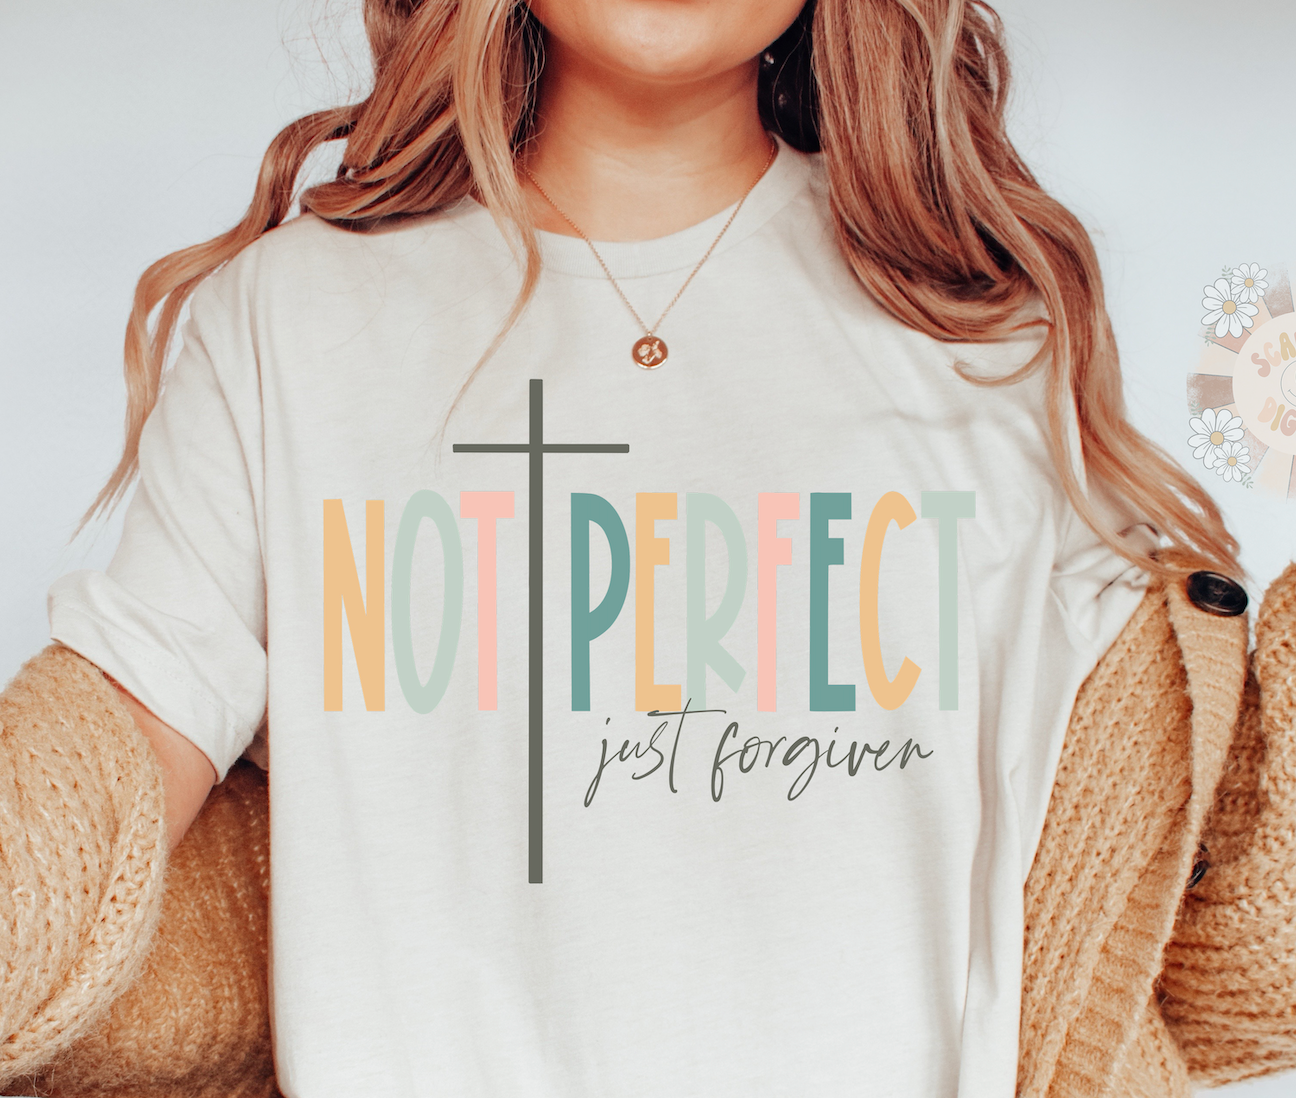 Not Perfect Just Forgiven PNG-Christian Sublimation Digital Design Download-bible verse png, scripture png, religious png, jesus christ png